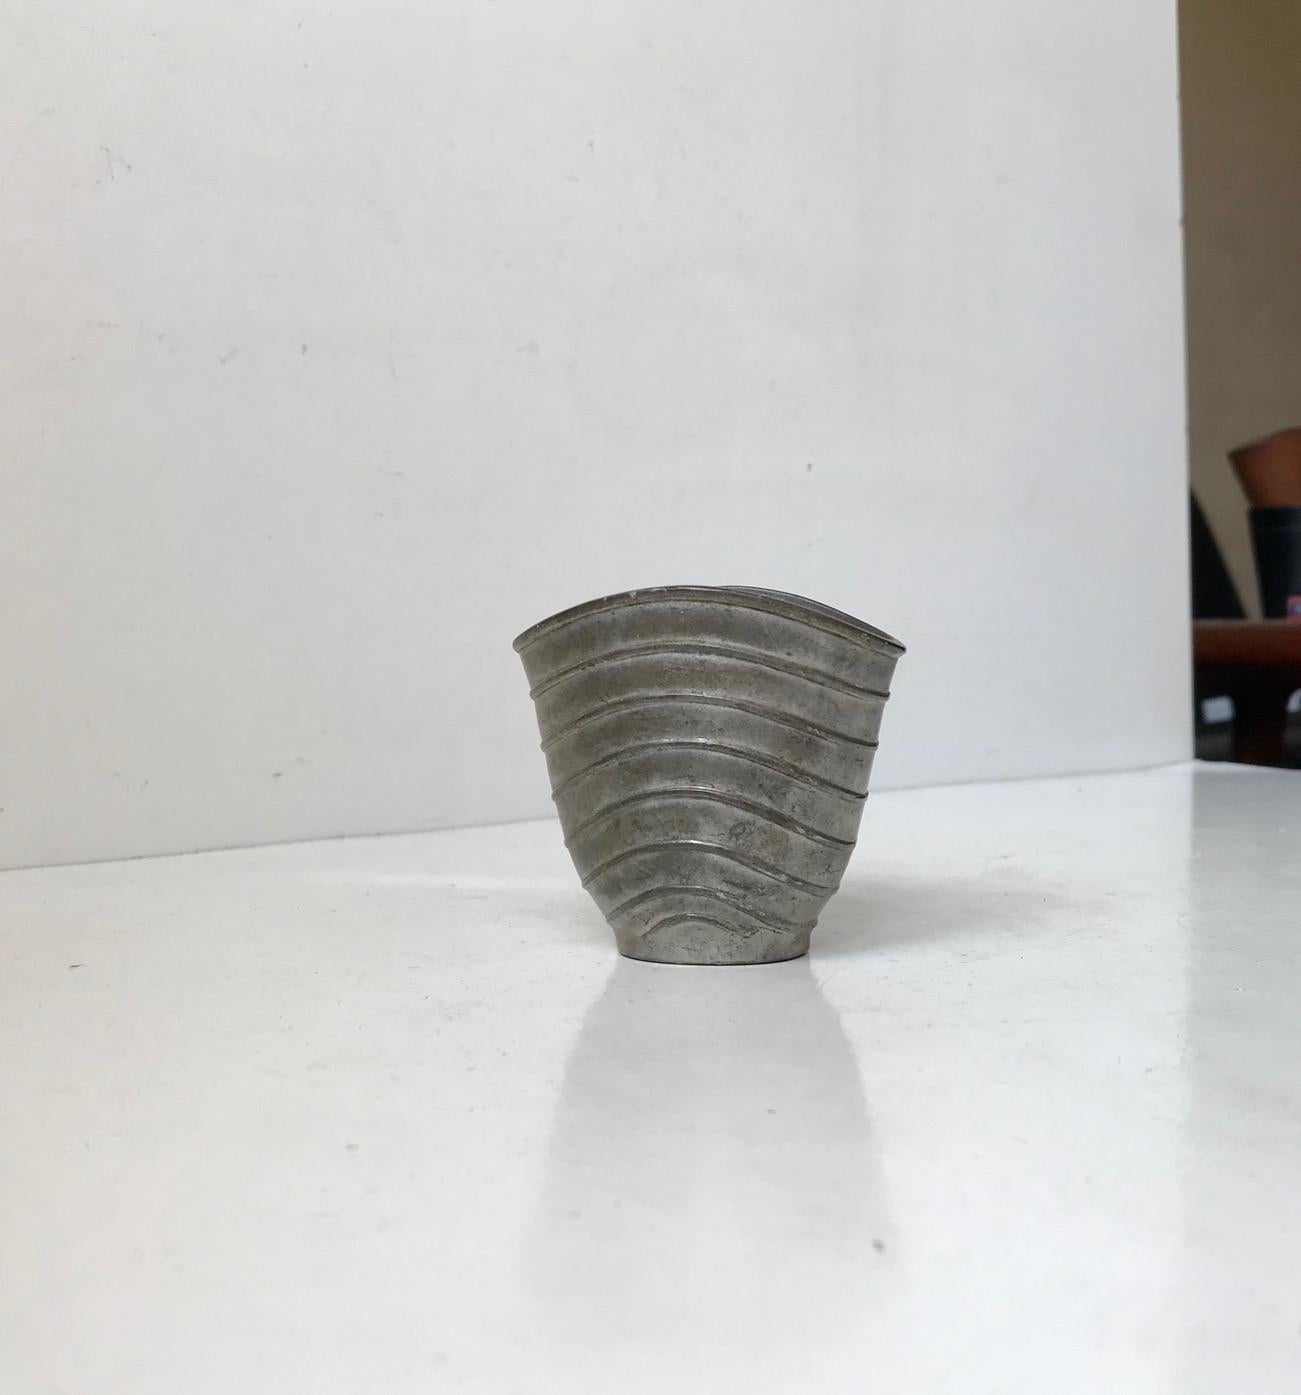 A rare pewter vase with wavy ribbings. Designed and manufactured by Just Andersen in Denmark during the 1930s. Imprinted to its base: Just, Danmark, 2505. Measurements: H: 6.8 cm, W/D: 7.3/5,5 cm.